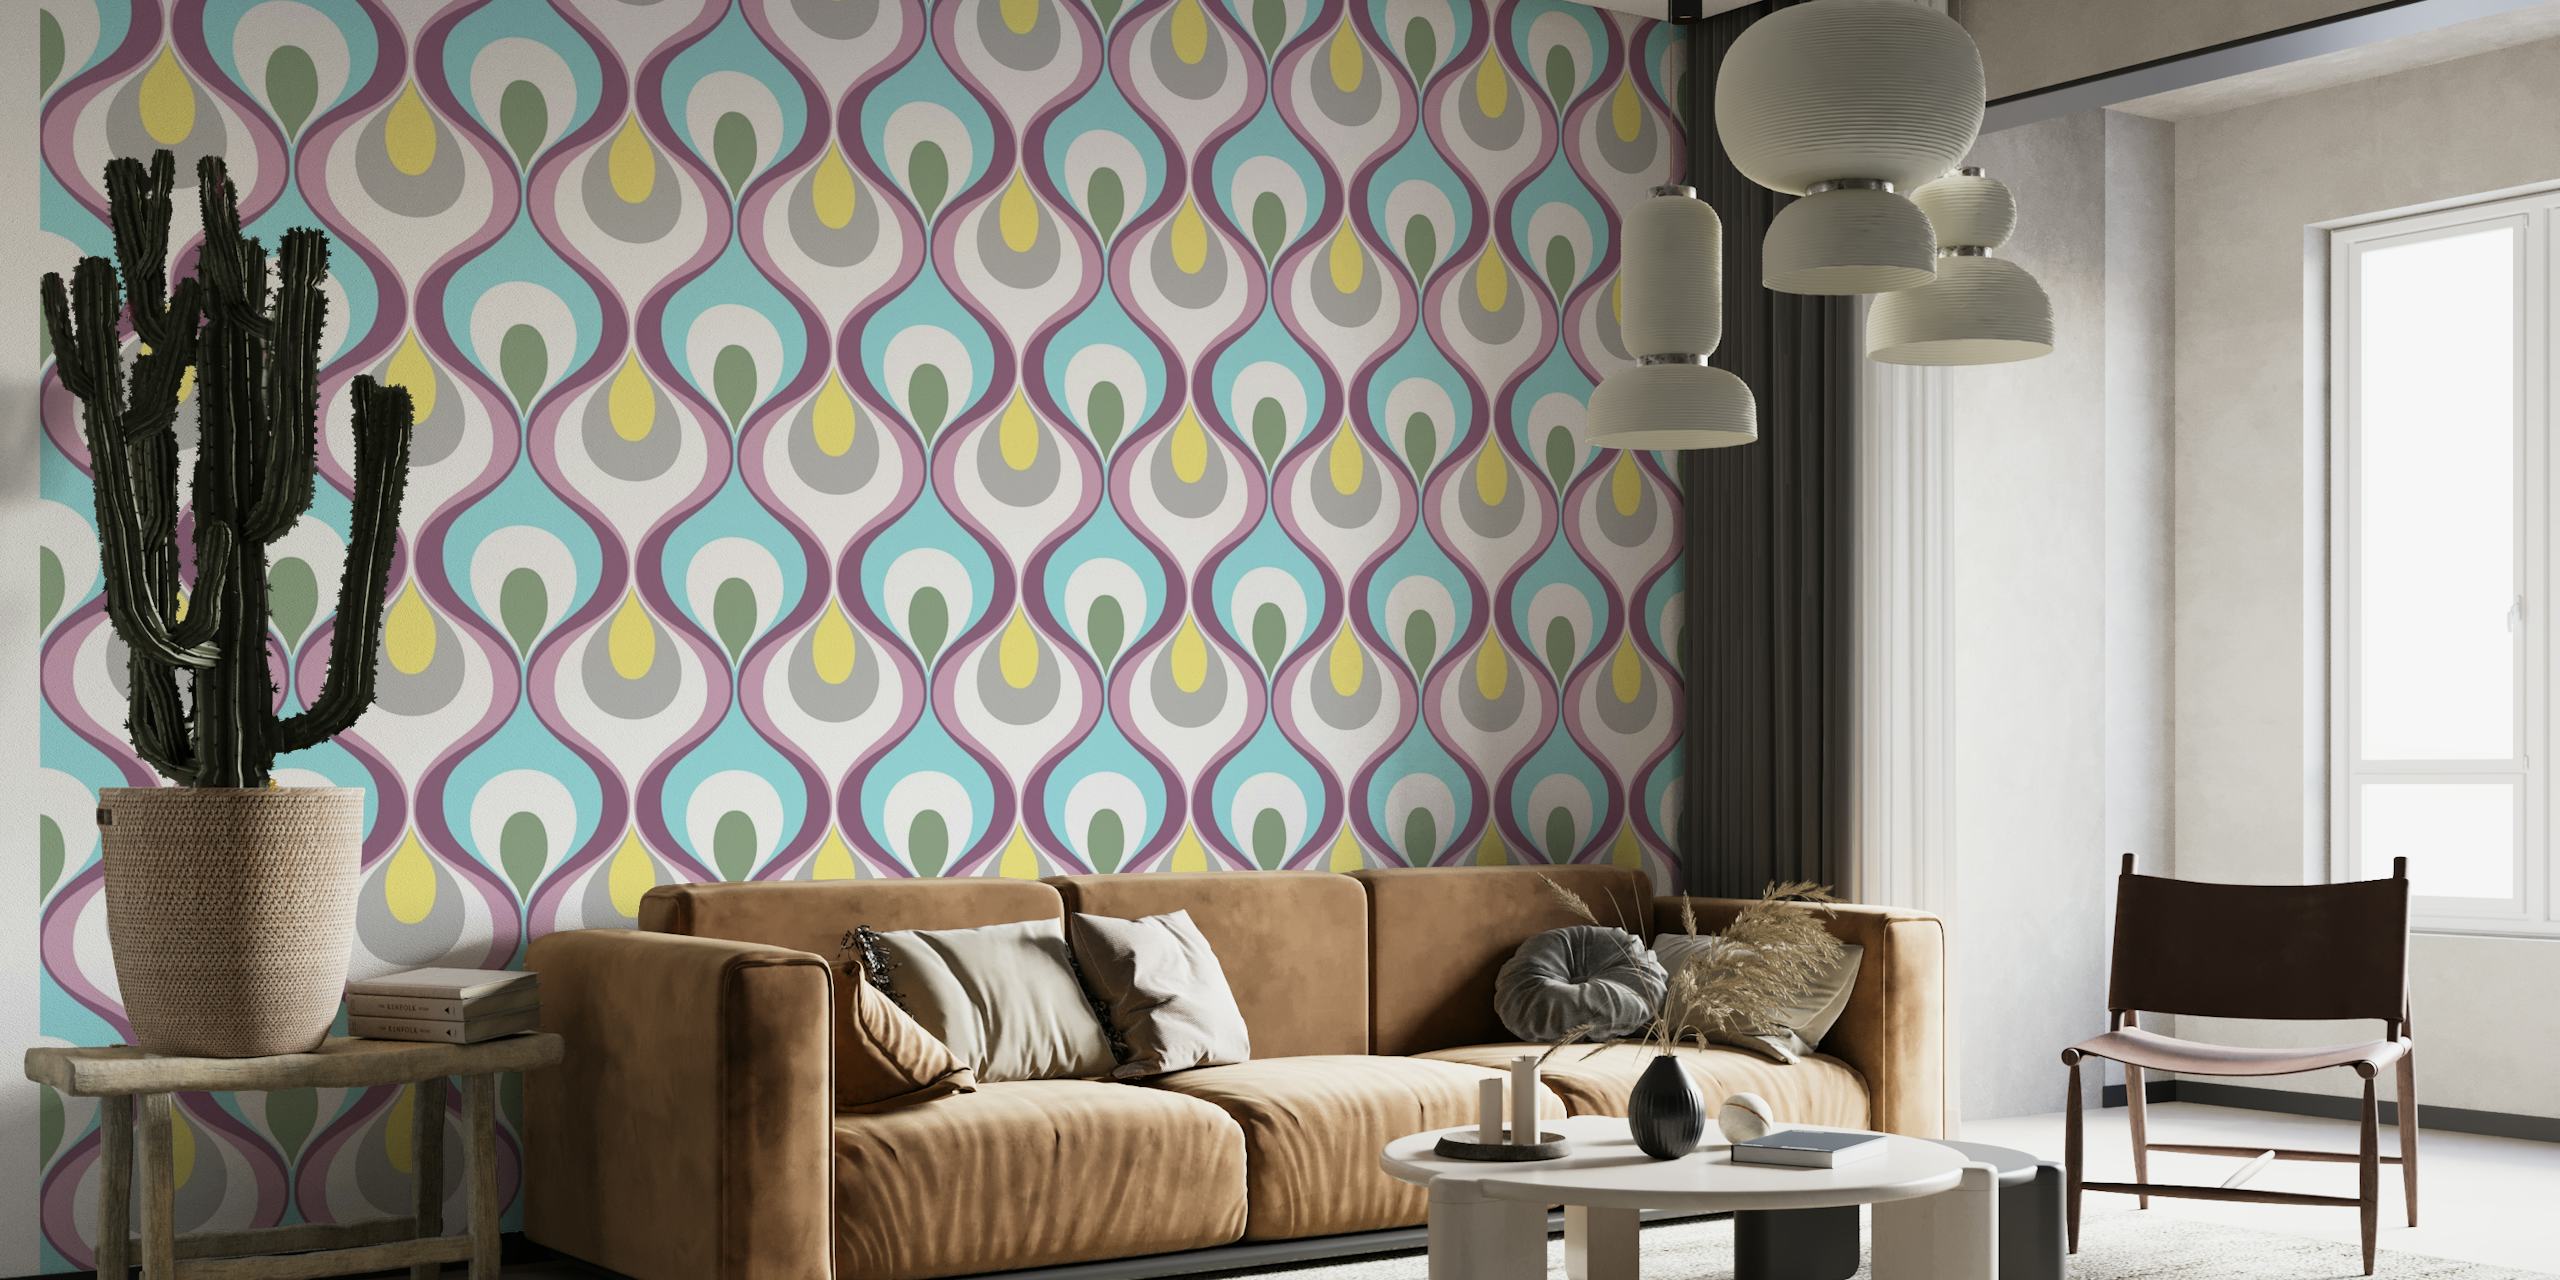 Geometric pattern wall mural with teal, peach, and beige colors in a retro style